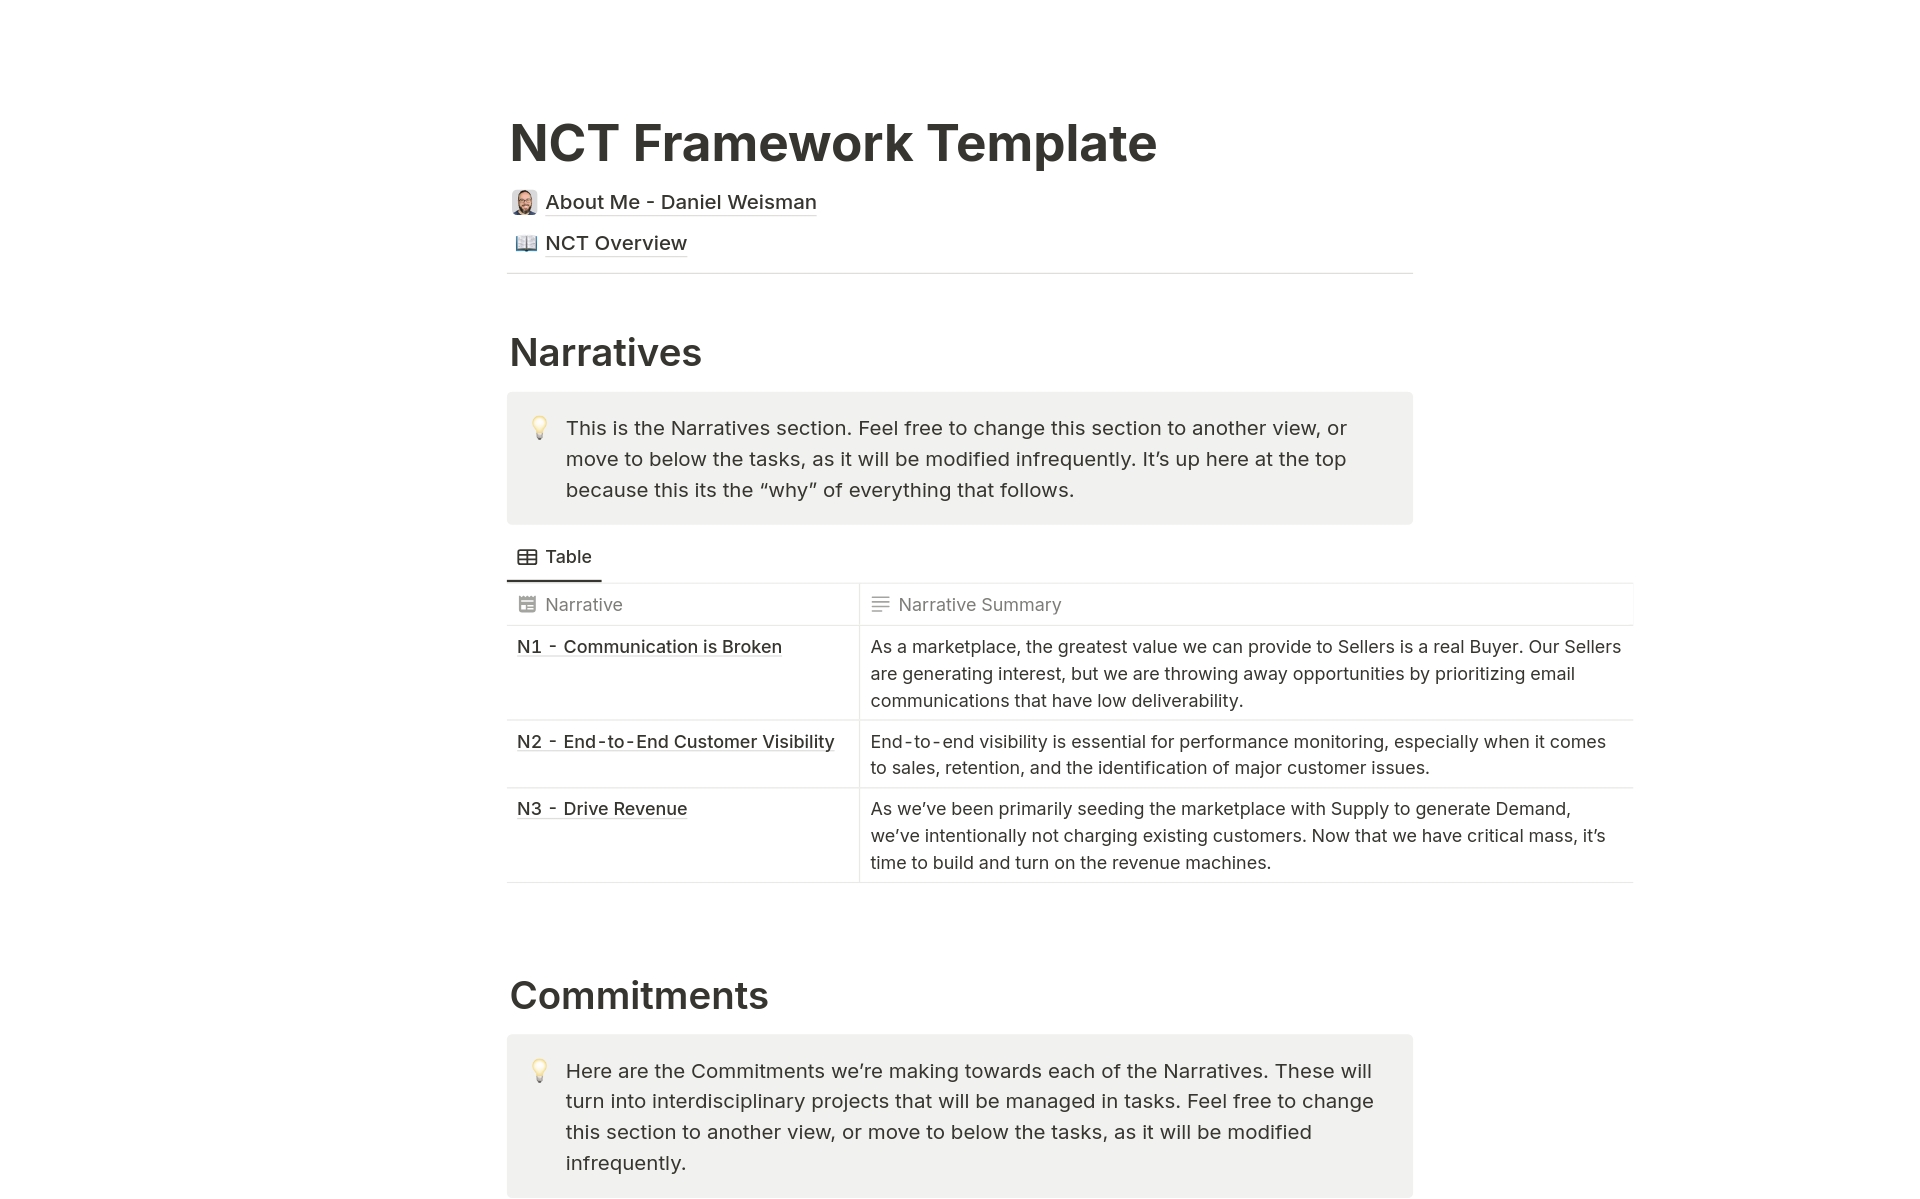 NCT Framework Template built in Notion. NCTs (Narratives, Commitments, and Tasks) created by Ravi Mehta are a rapidly-growing alternative to the OKR Framework developed by Intel CEO legend Andrew Grove.